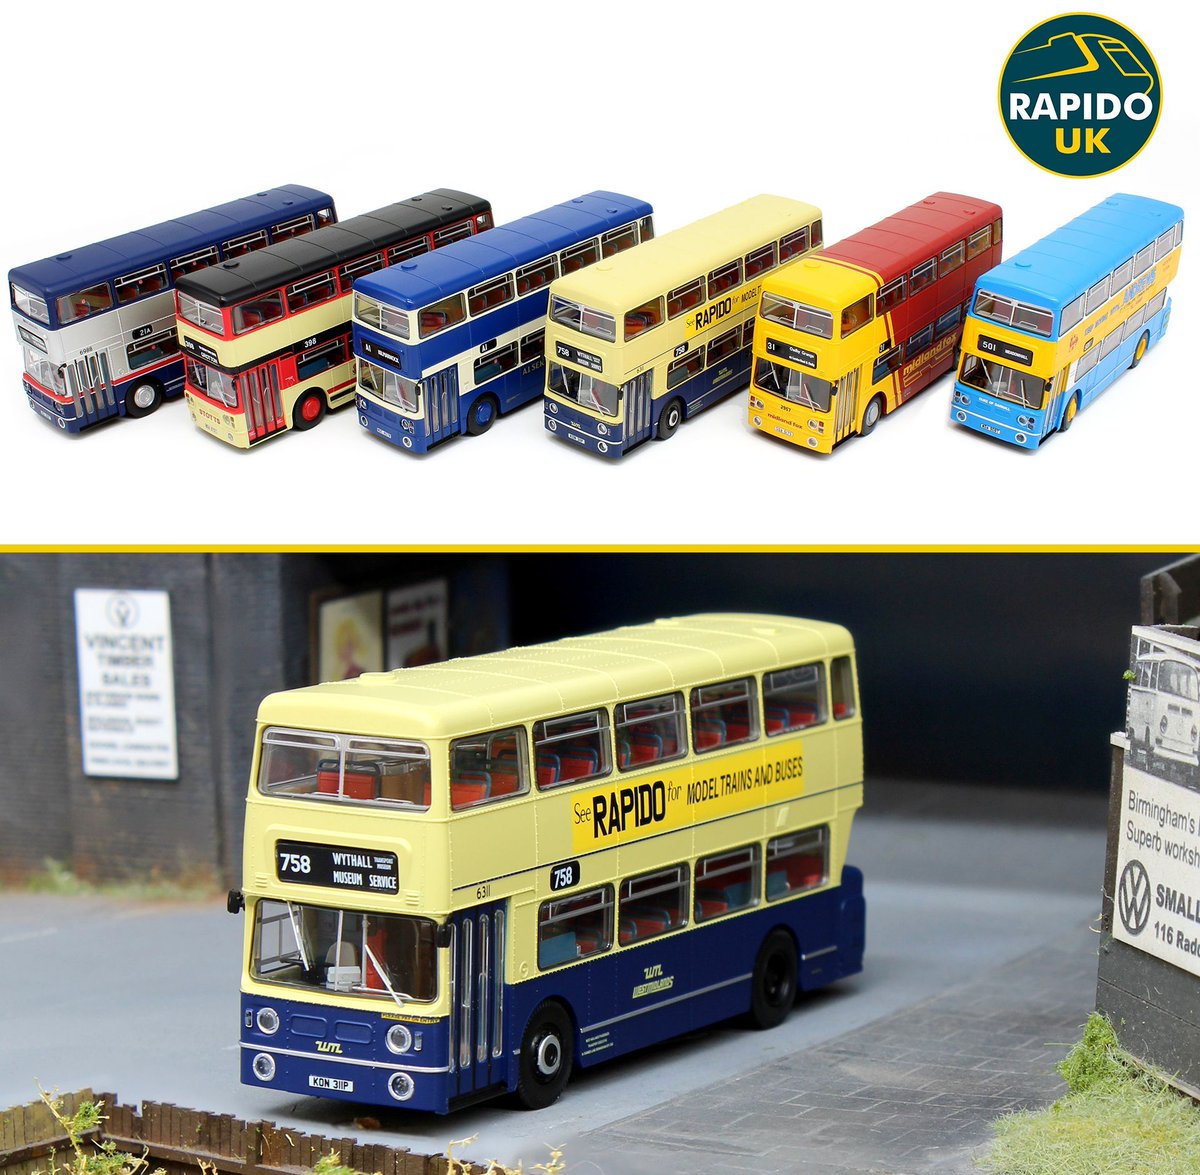 (insert joke about multiple buses turning up at once)
Leyland Fleetline colour samples are here!
What a gorgeous array of liveries, including the best of all, the preserved bus complete with retro-style Rapido ads!
Production is almost complete and we hope to have the buses soon.